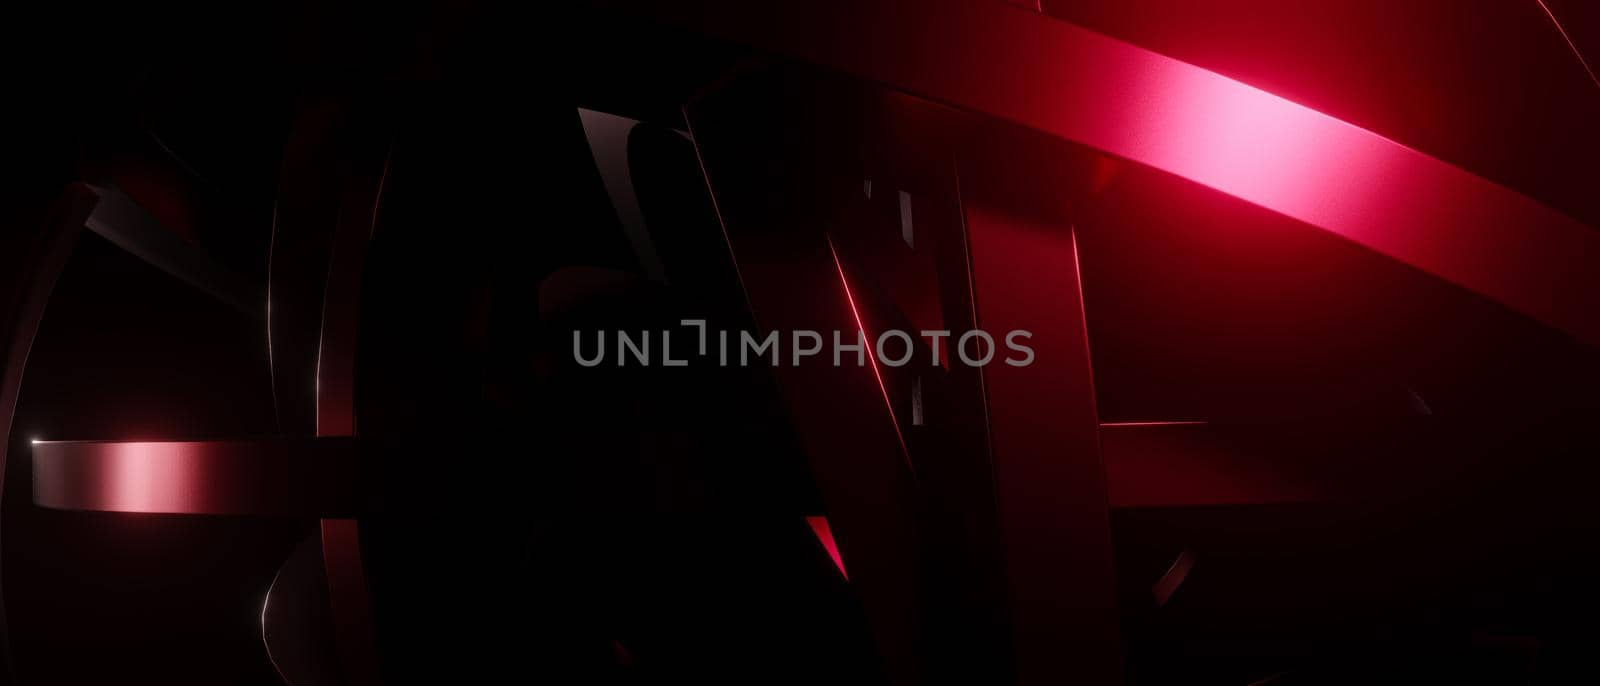 Modern Overlapping Metallic Surfaces Serious Black Abstract Background 3D Rendering